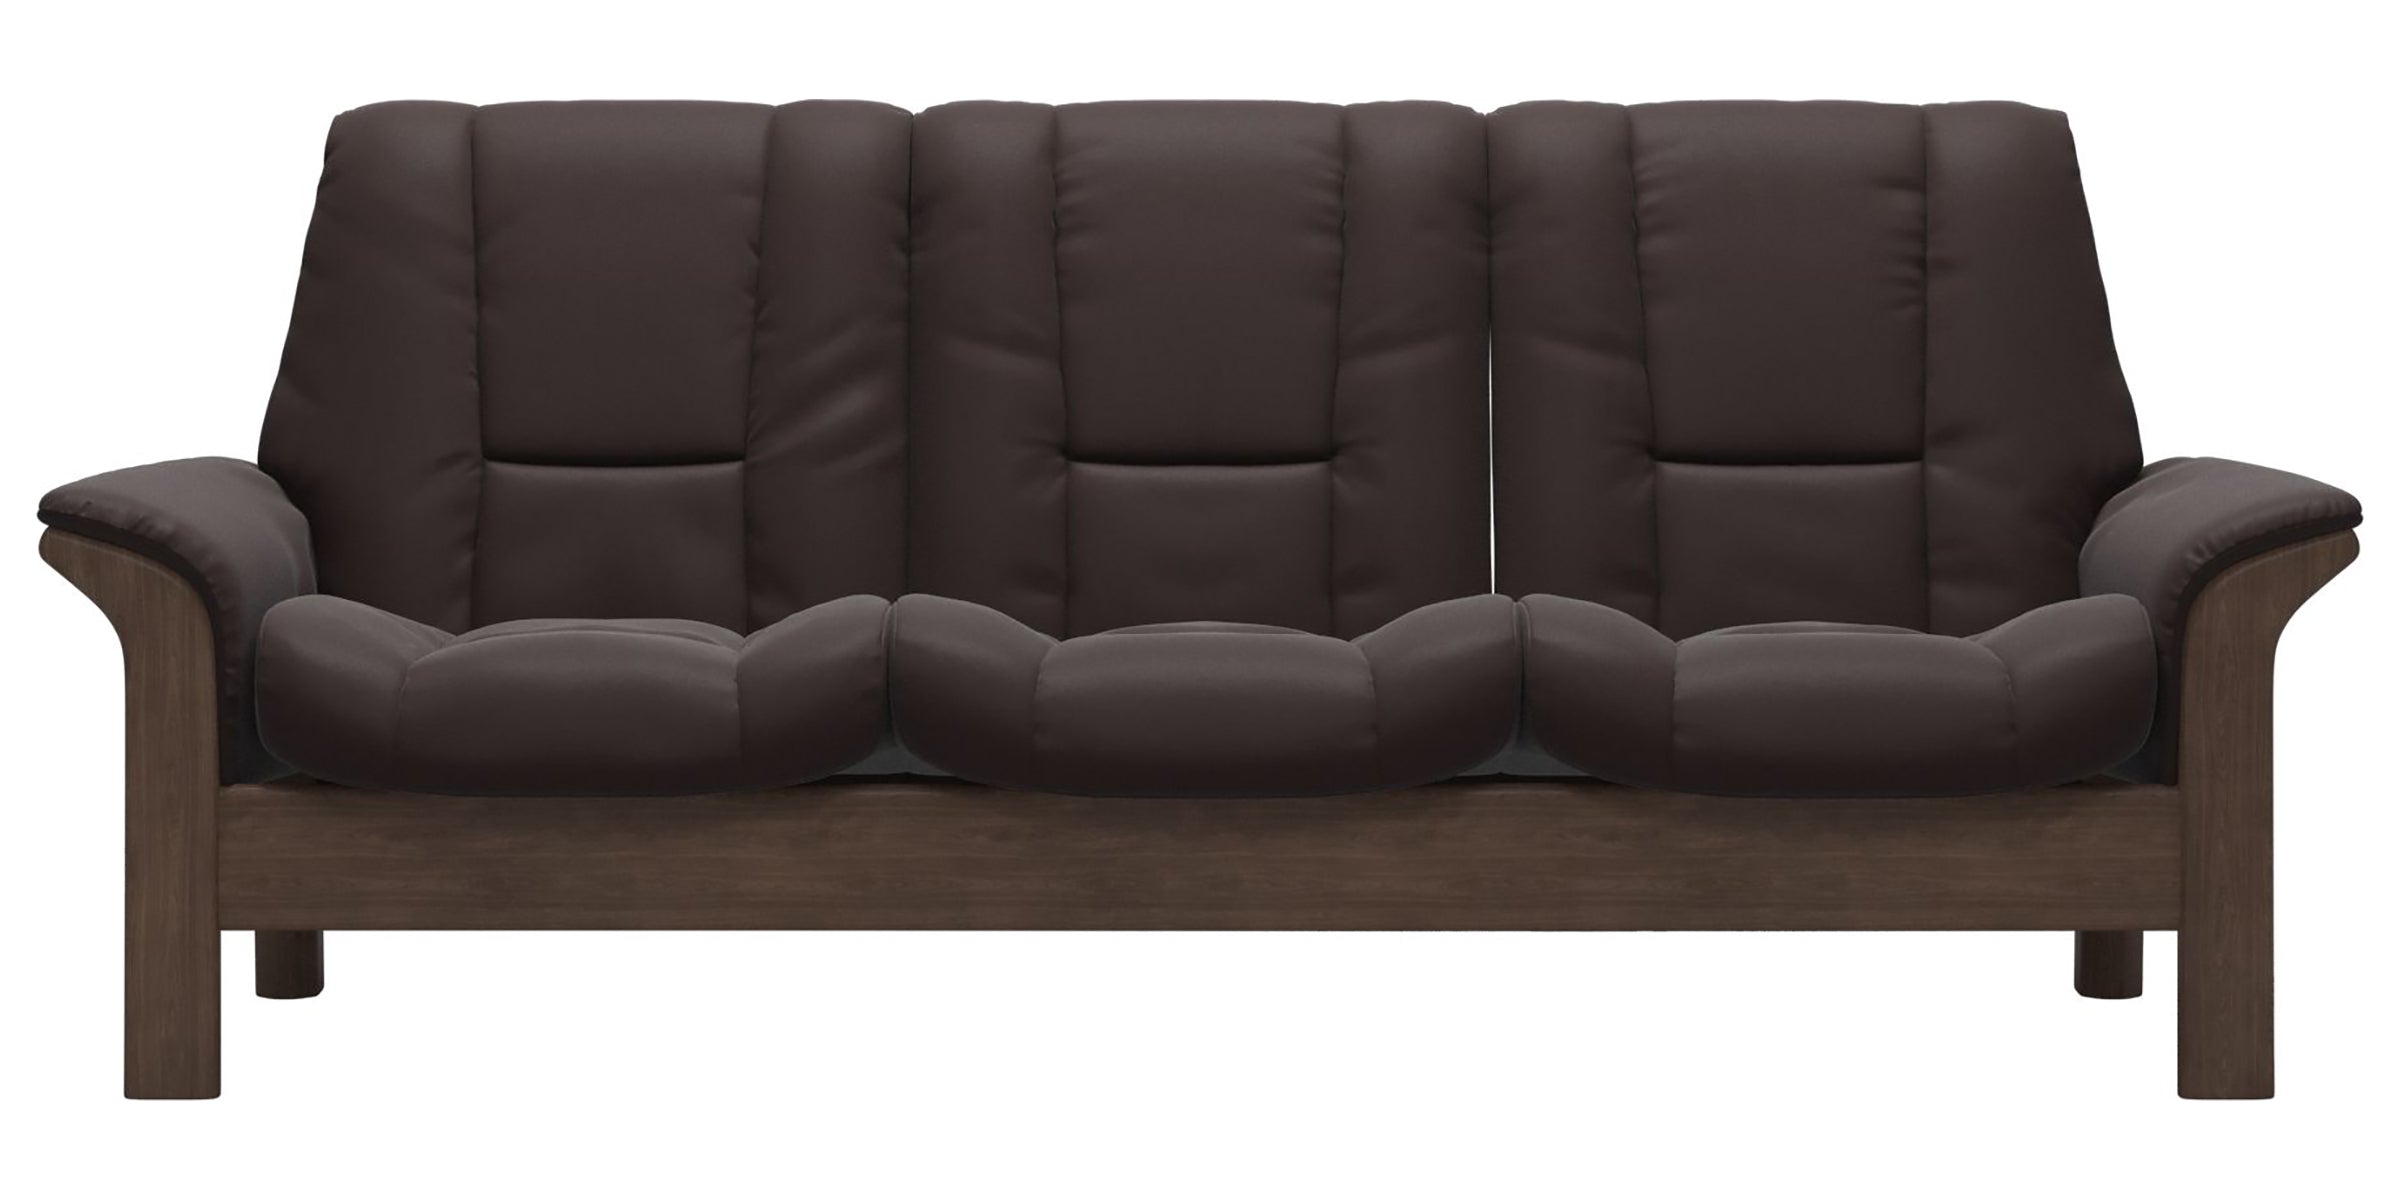 Paloma Leather Chocolate and Walnut Base | Stressless Windsor 3-Seater Low Back Sofa | Valley Ridge Furniture